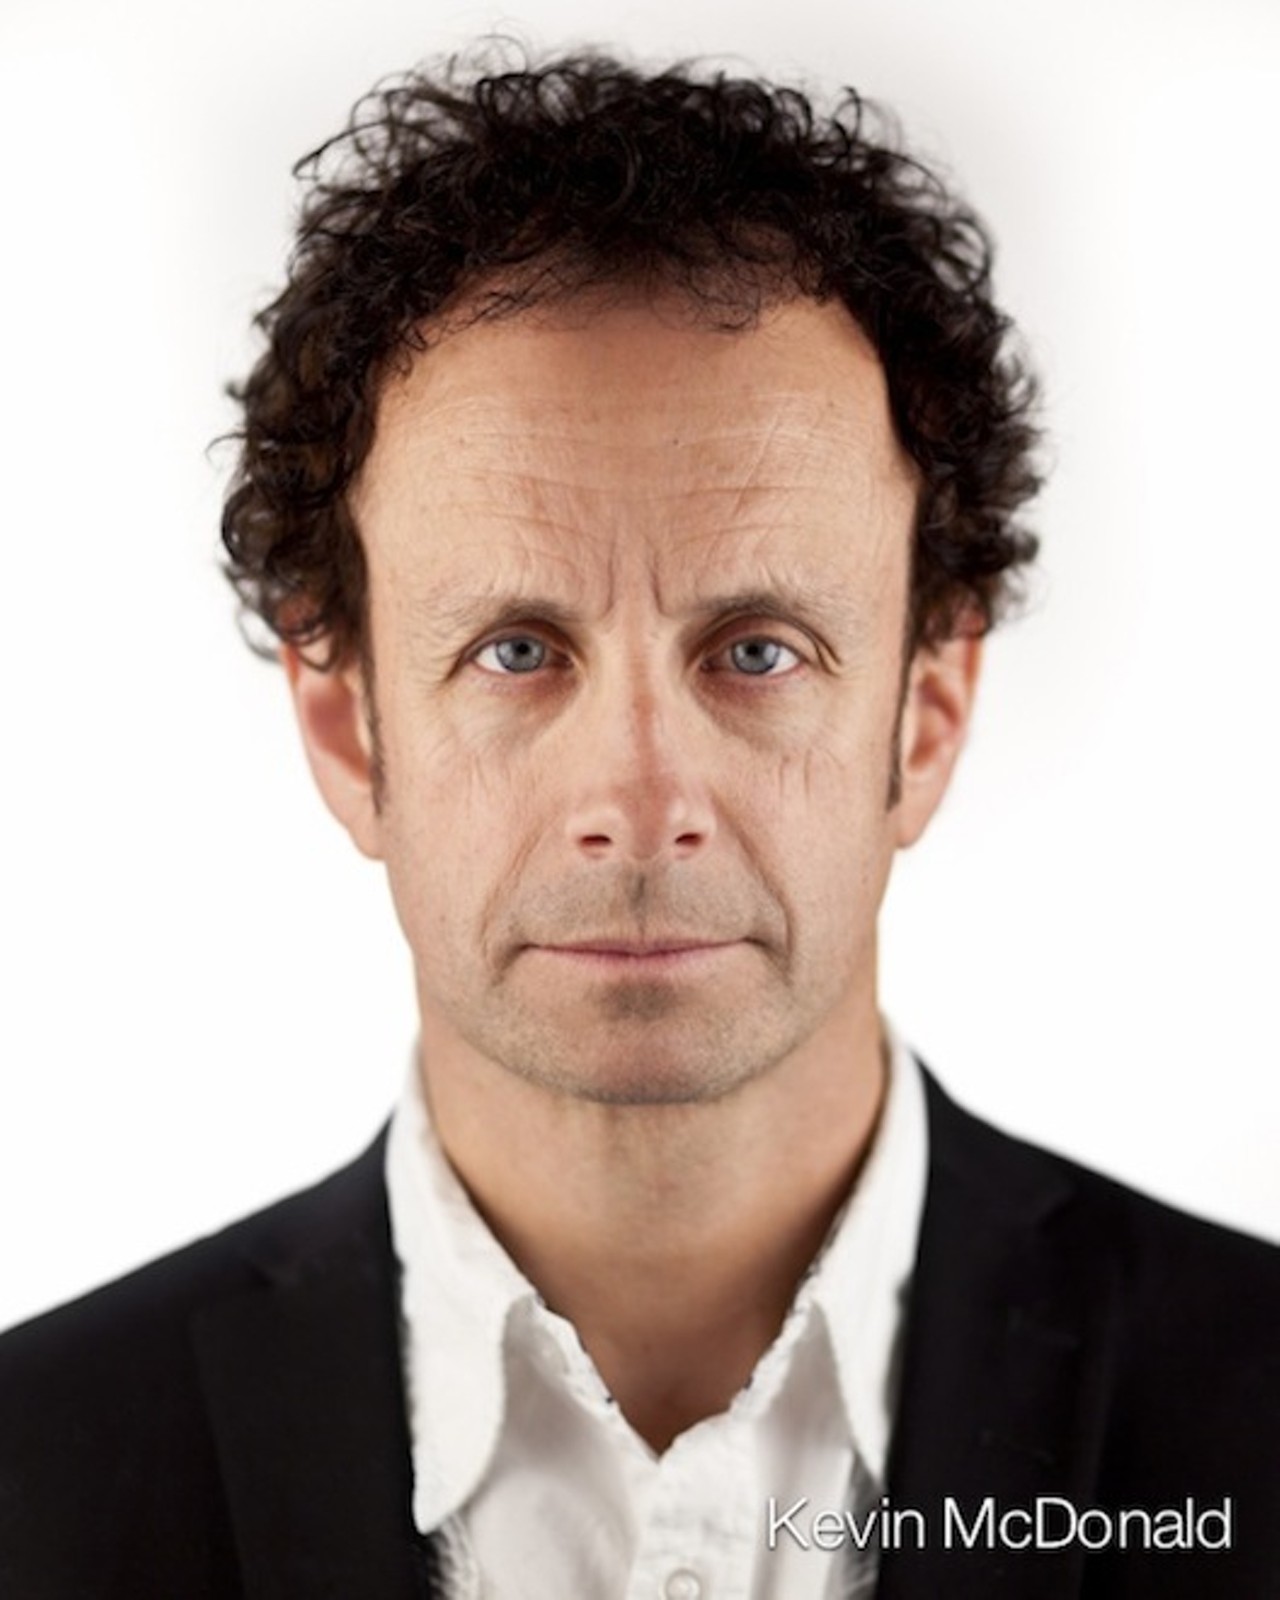 Kevin McDonald
Saturday, Nov. 23
9:30 p.m. and 11:30 p.m.
SAK Comedy Lab, 29 S. Orange Ave.
407-648-0001
sak.com
$12-$15
In a world where we increasingly click &#147;confirm&#148; on Facebook events we somehow never make it to, we have no problem committing to a full weekend of opportunities to see the king of empty promises, Kevin McDonald, because the Kids in the Hall comedian may not remember to return your videos, but he offers guaranteed laughs. He performs twice with the SAK professional ensemble, first an improv show at 9:30 p.m., then a stand-up show at 11:30 p.m. in combination with an improvised set with the SAK cast. So pick your poison (either way you&#146;ll probably be girl-drink drunk on the hilarity) or splurge for both shows. And for any aspiring or active comedians interested in comedy lessons from McDonald, he&#146;ll host a two-day workshop on sketch writing for $285. Find more details on the SAK site. &#150; Ashley Belanger